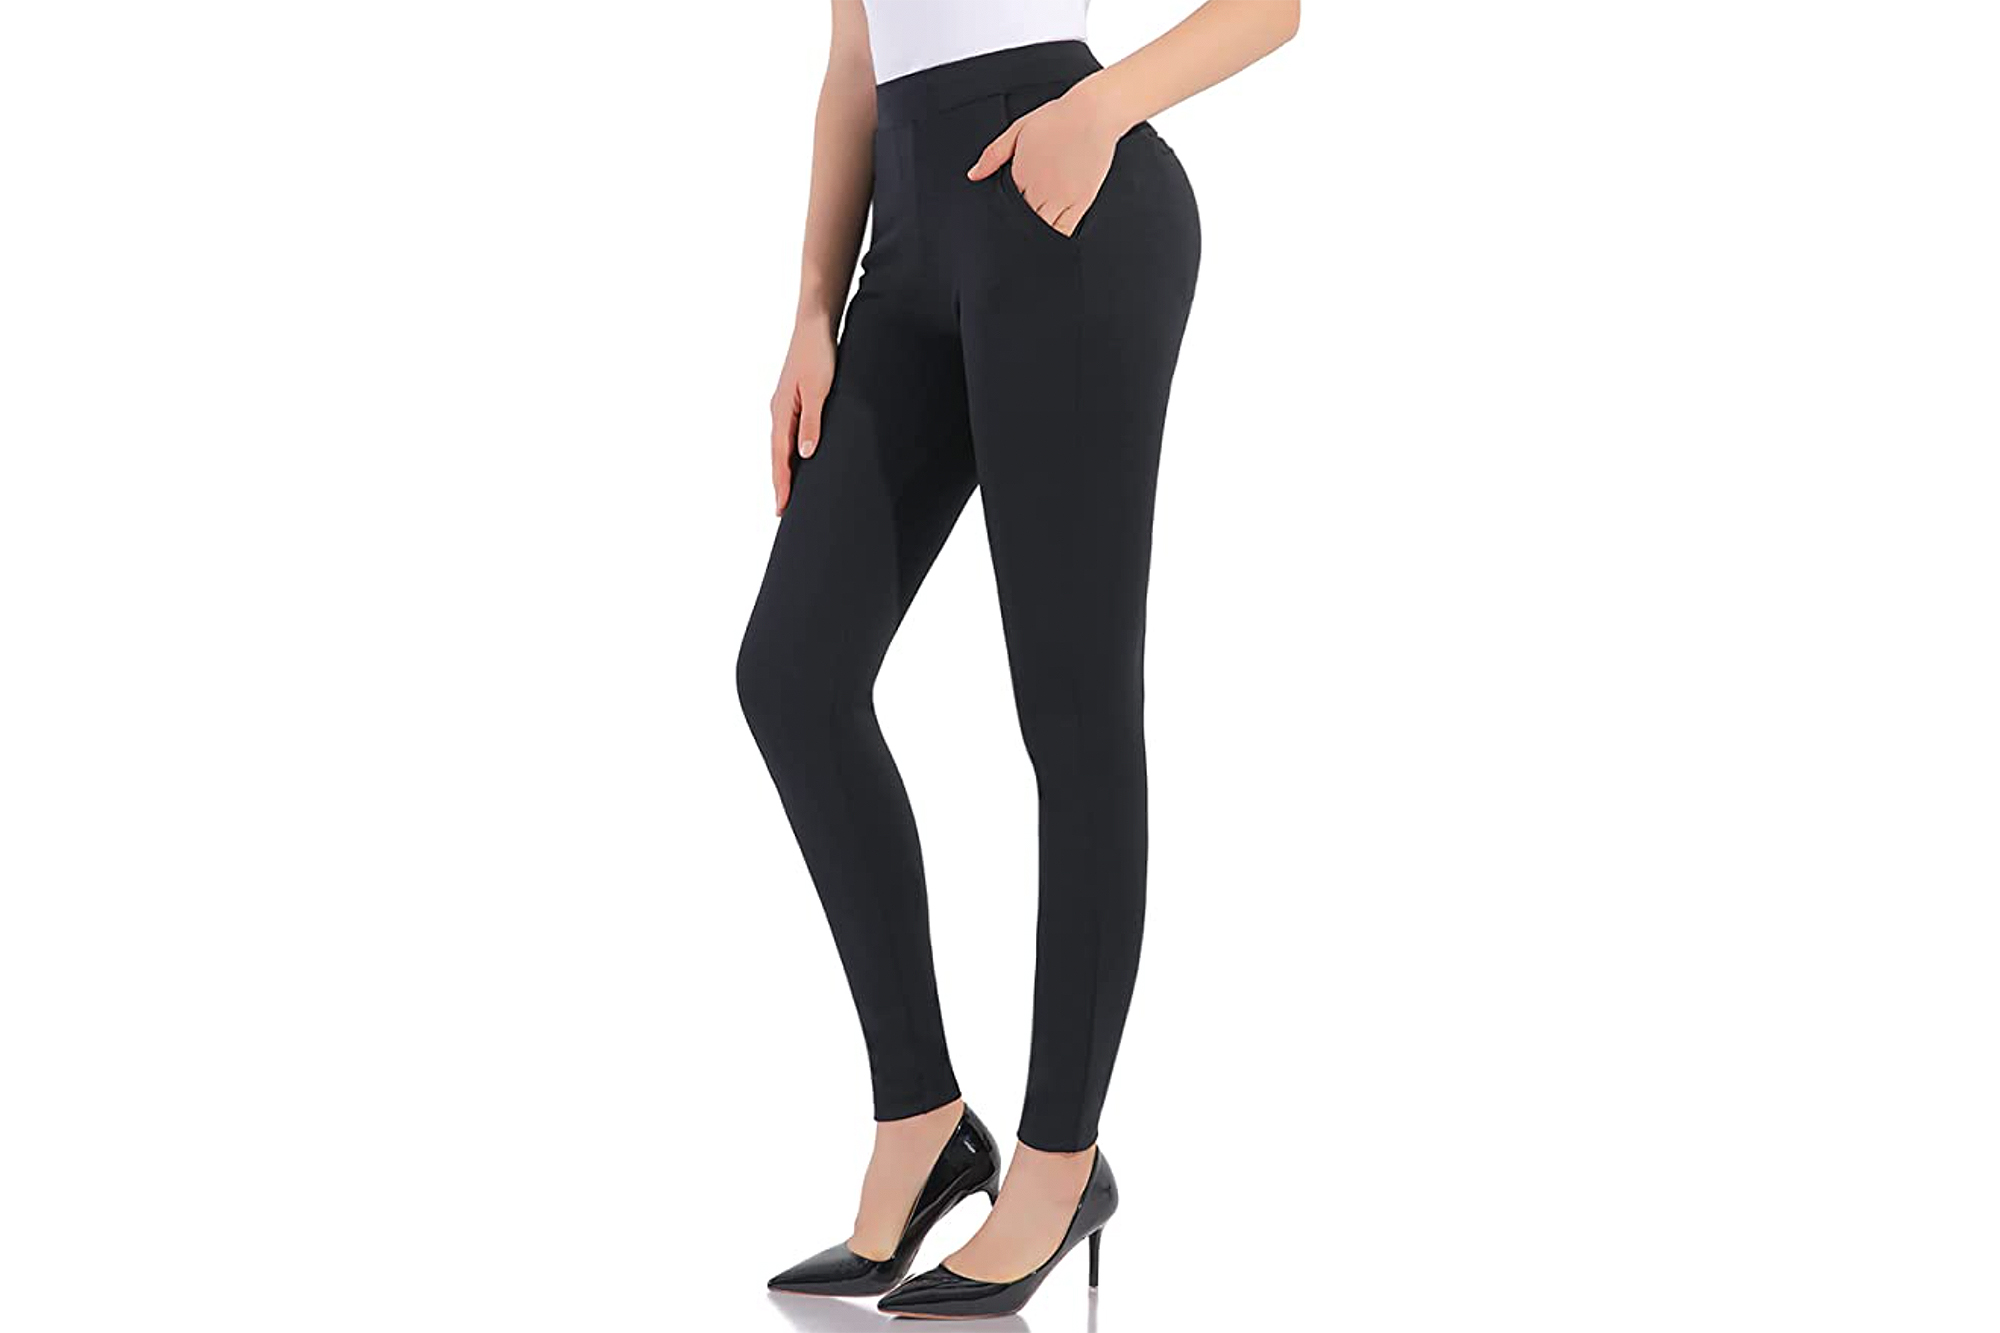 Pmiys Yoga Pants Can Take You From the Office Straight to the Gym